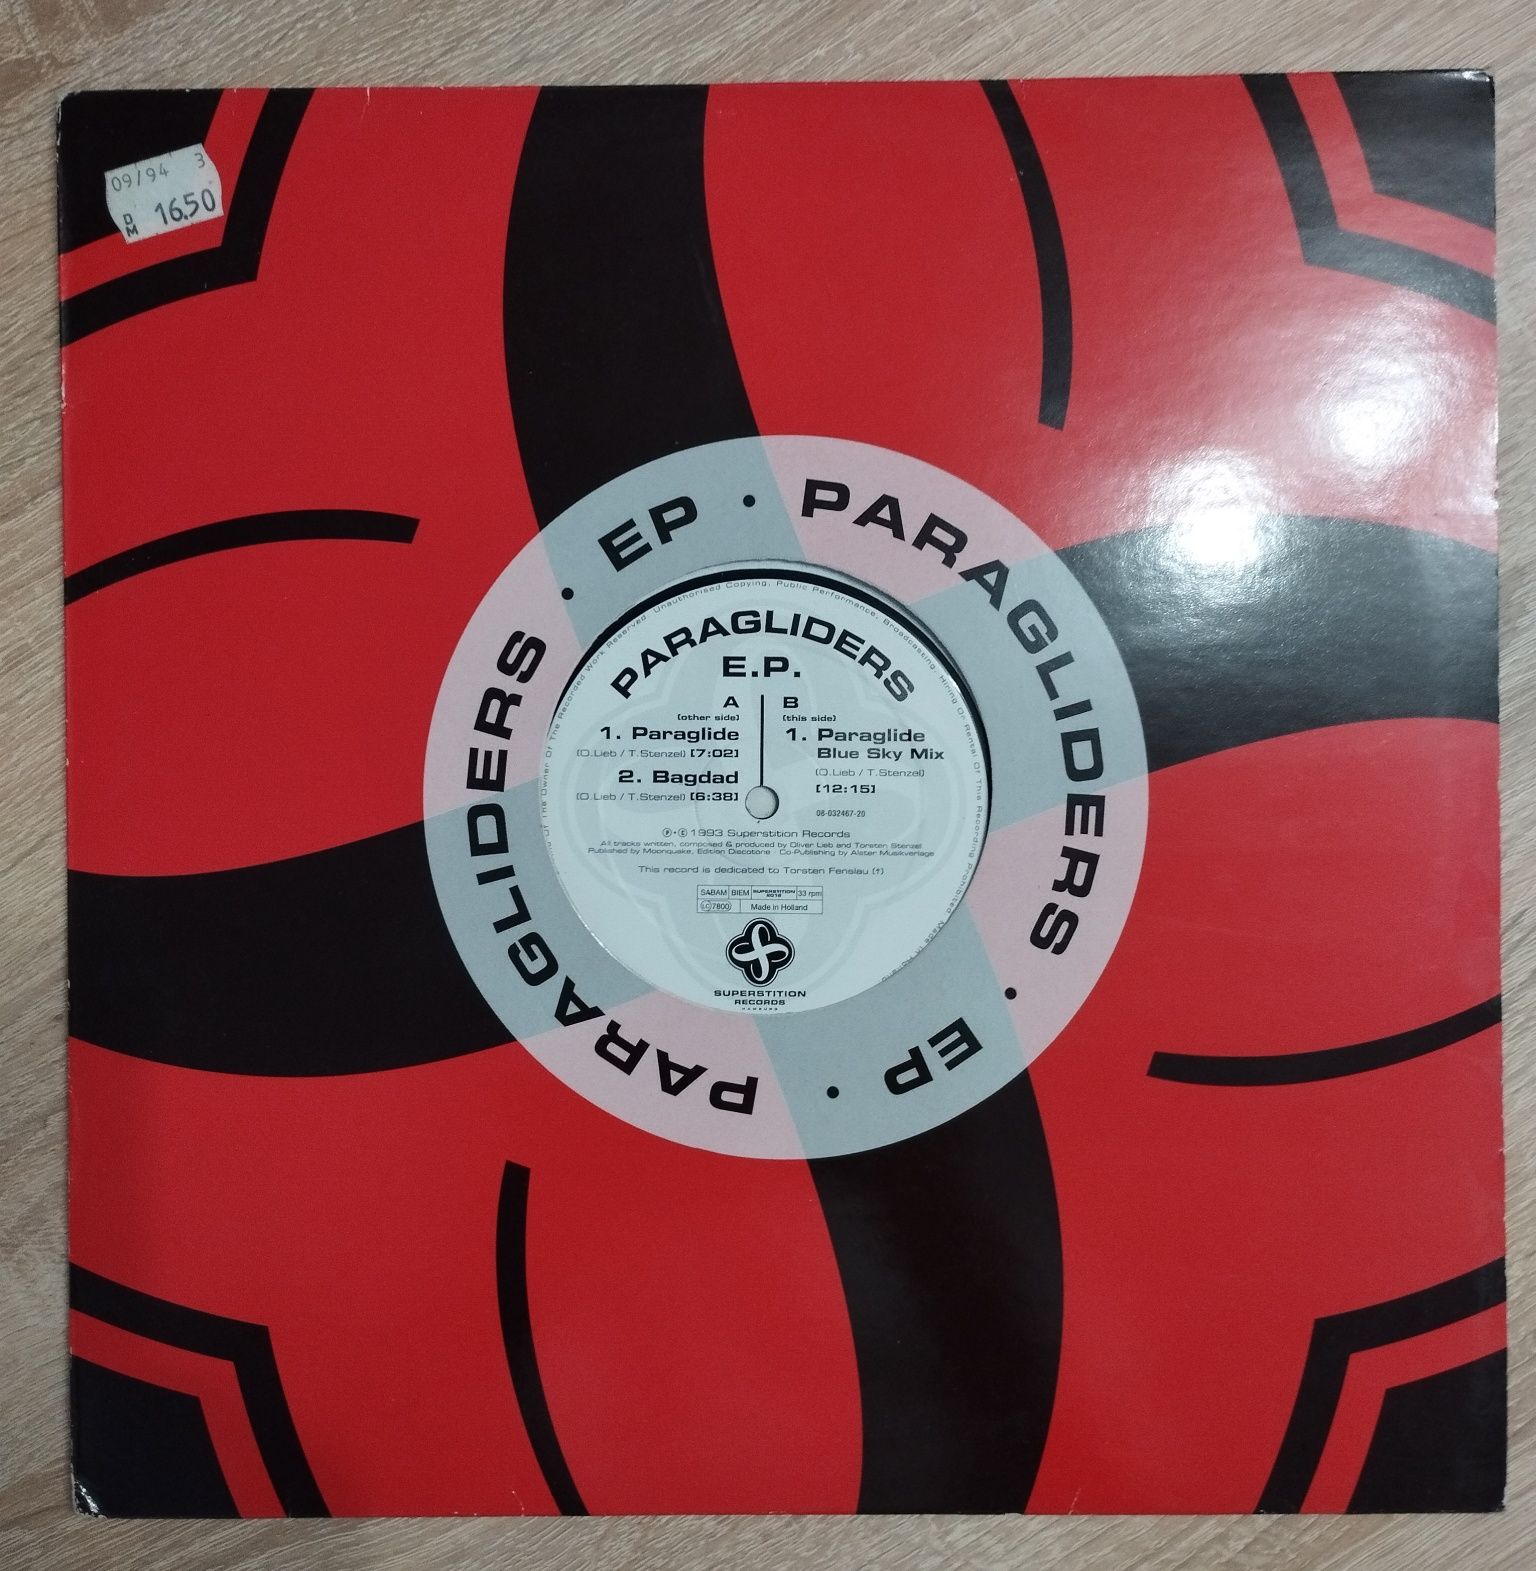 Paragliders – Paragliders E.P. (winyl 12") [1993]